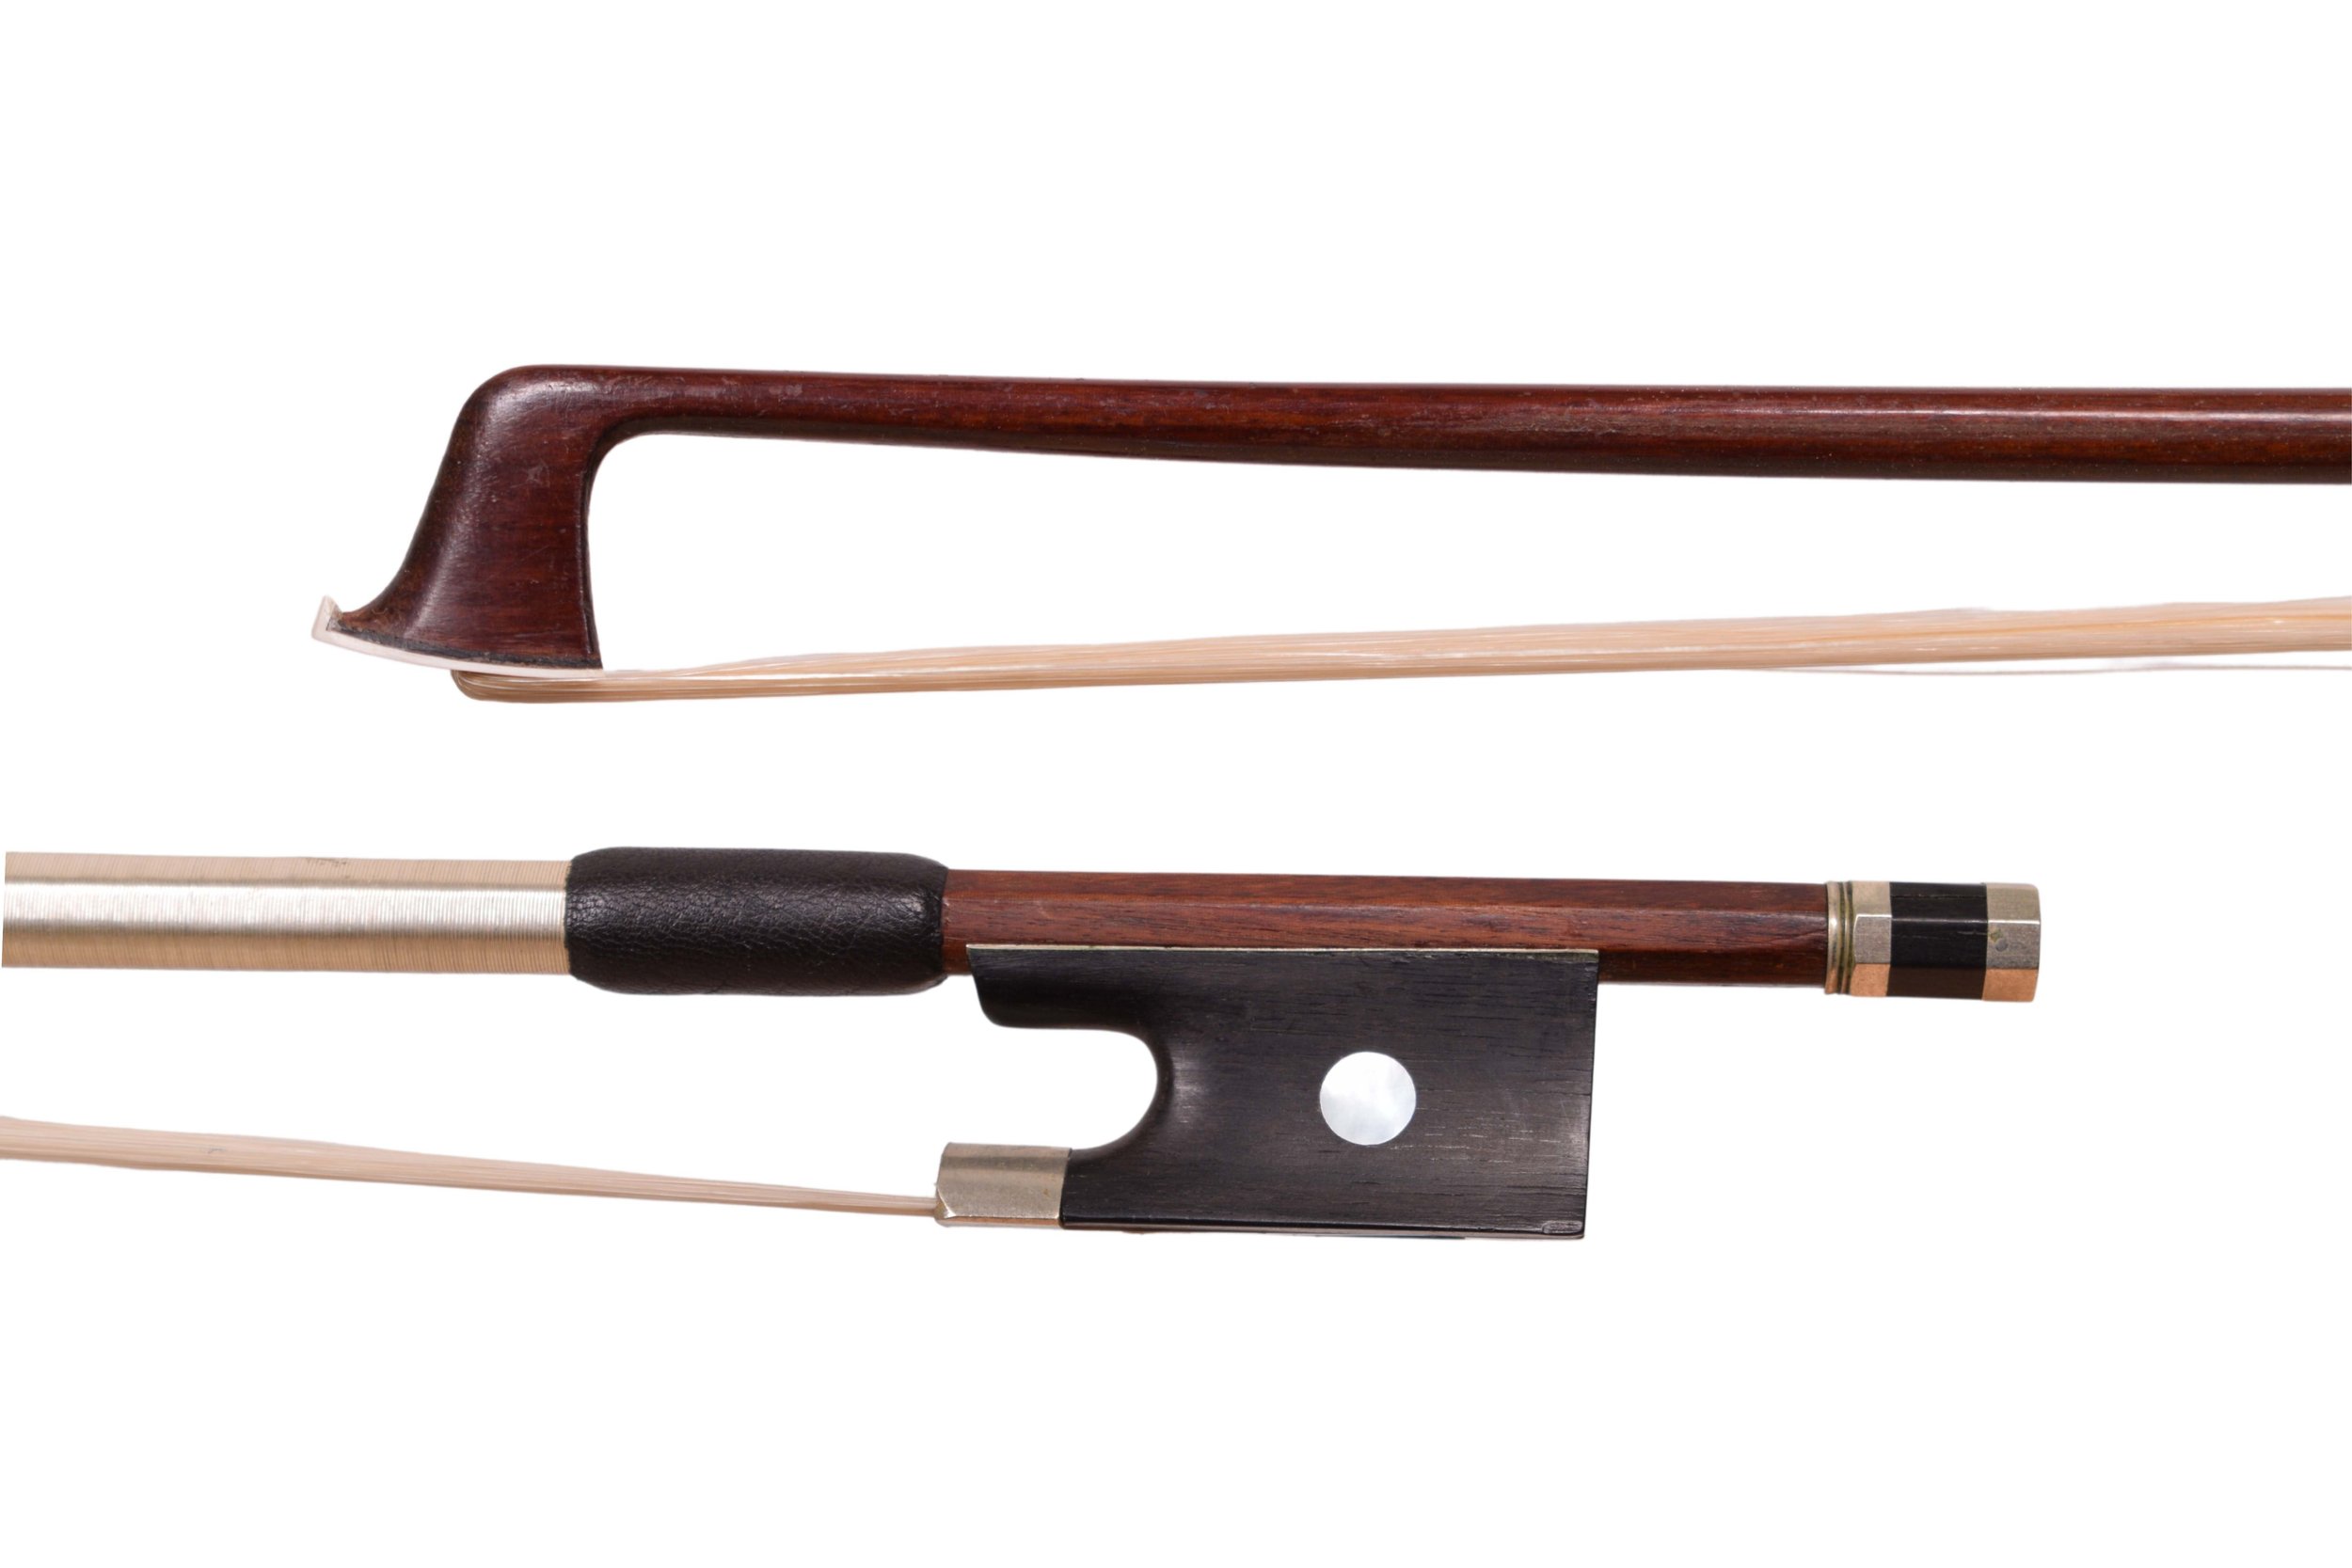 Frog and head of seven eighths size violin bow ...